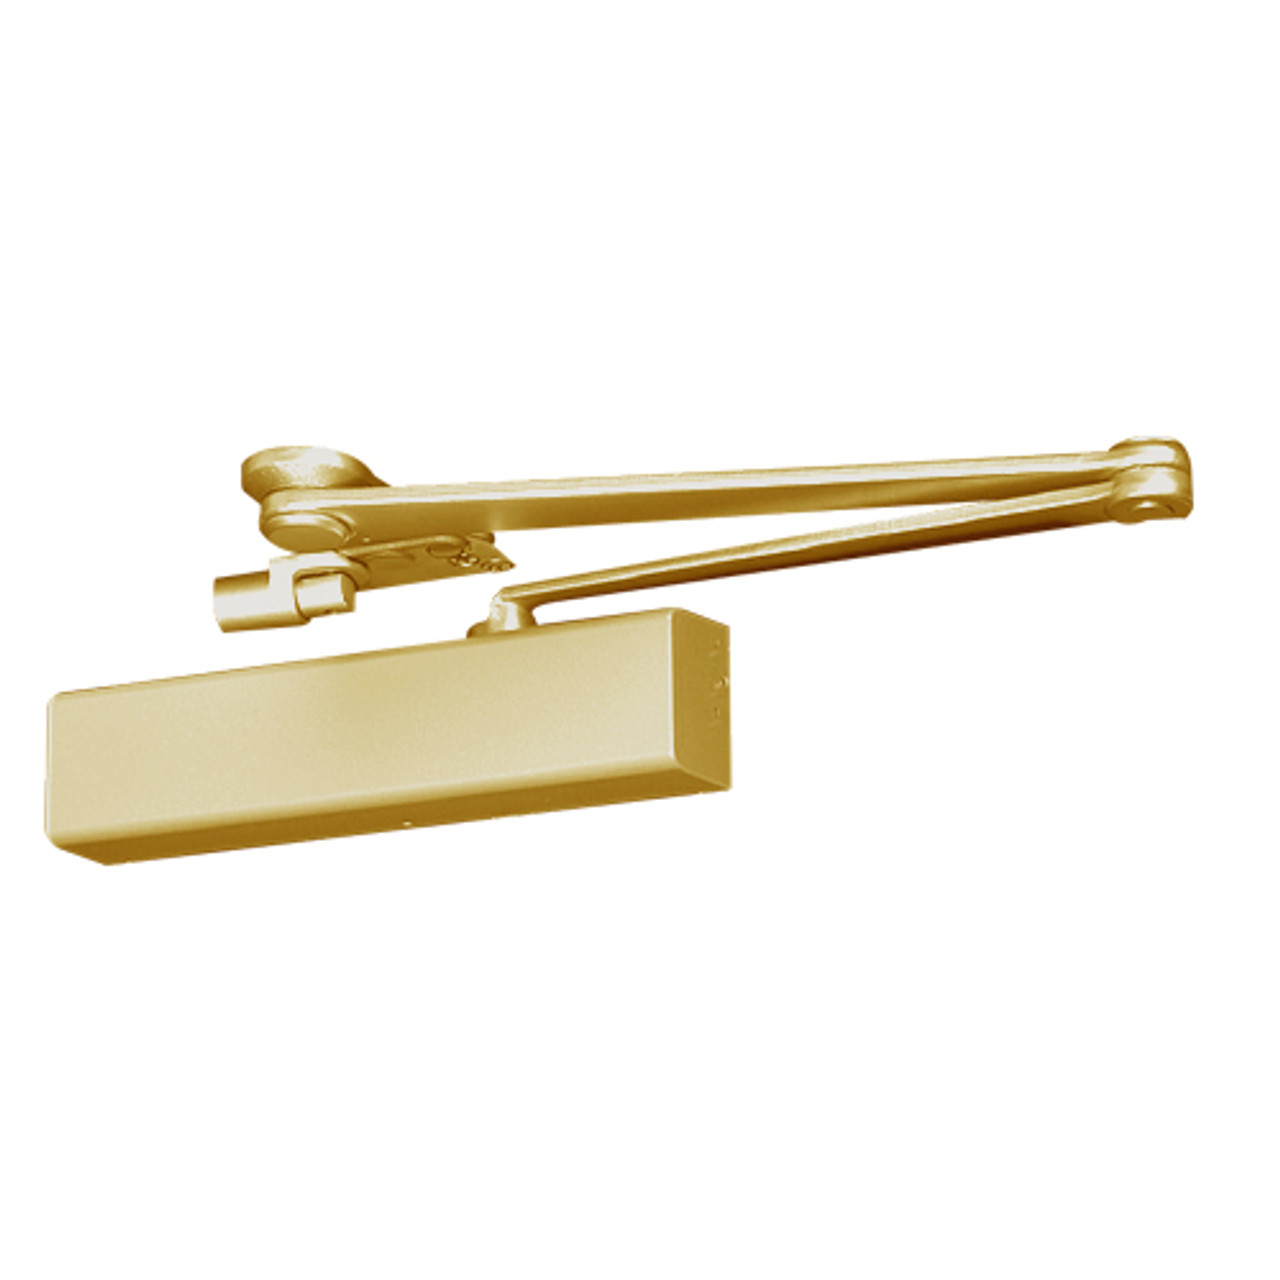 CPS8501T-696 Norton 8000 Series Full Cover Hold Open Door Closers with CloserPlus Spring Arm in Gold Finish